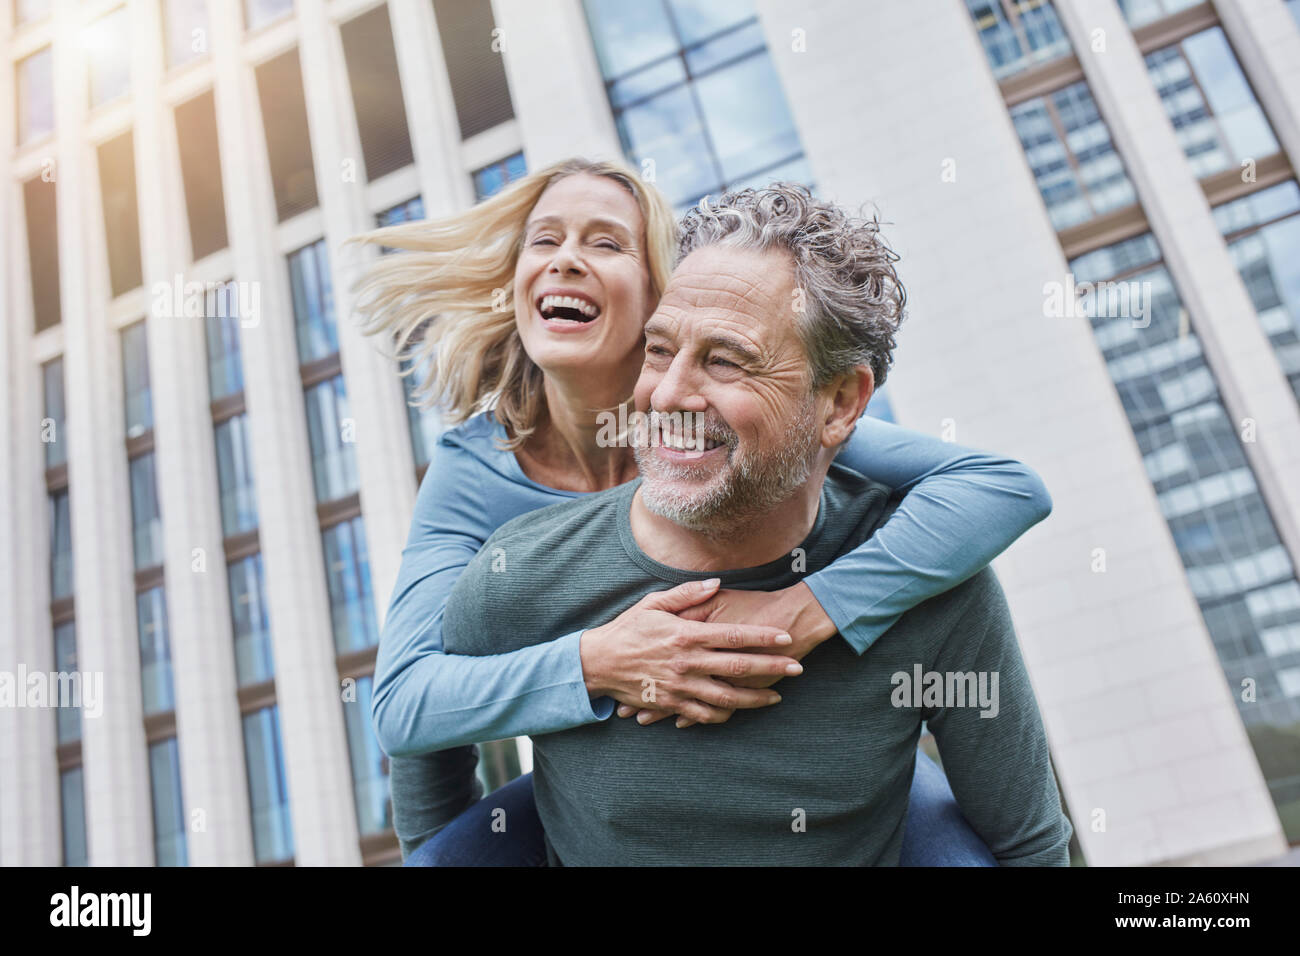 Happy mature man carrying woman piggyback in the city Stock Photo